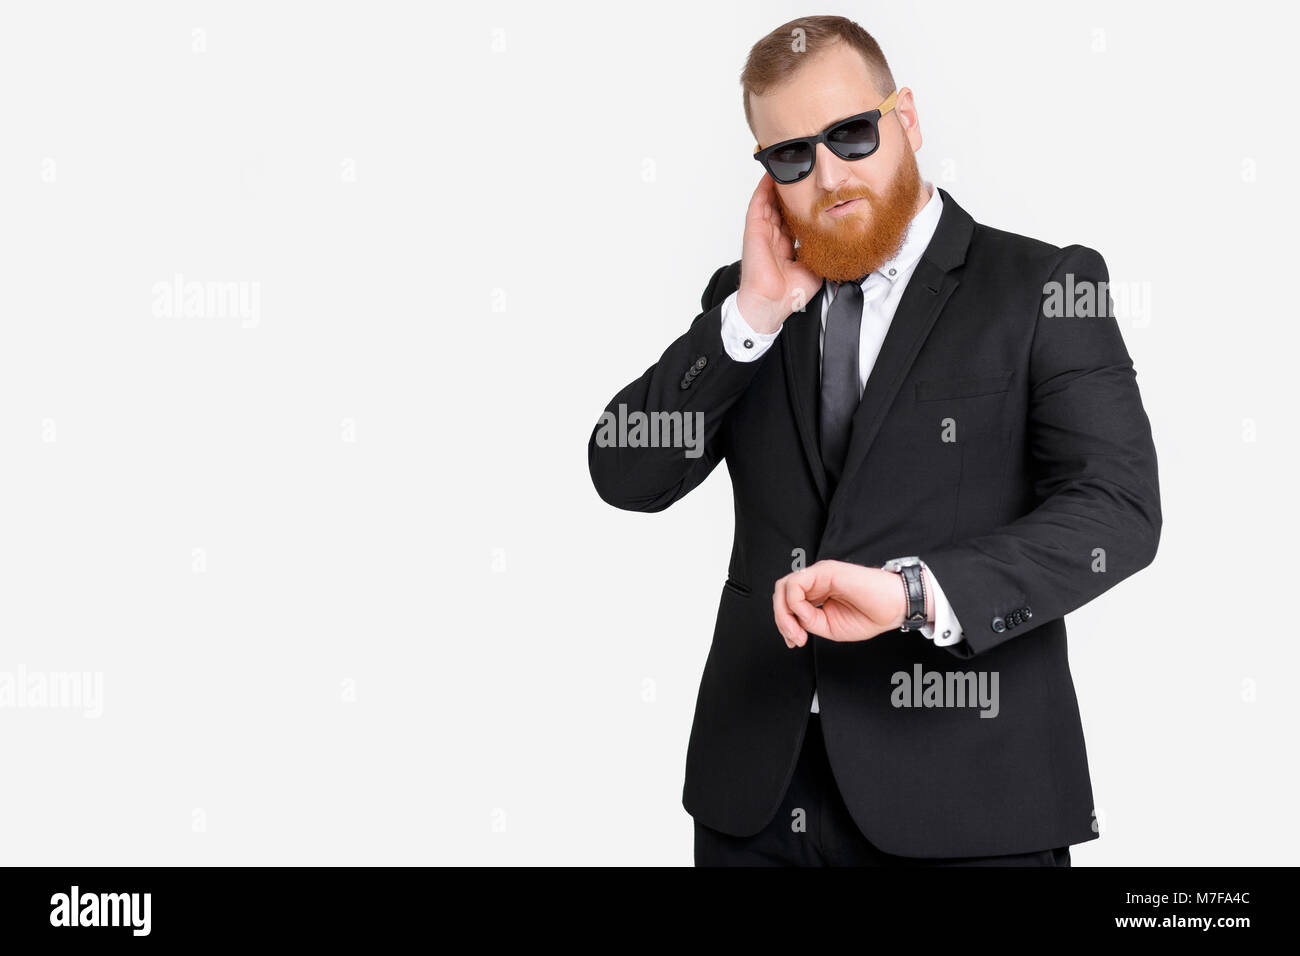 security guard in black suit looks at watch Stock Photo - Alamy